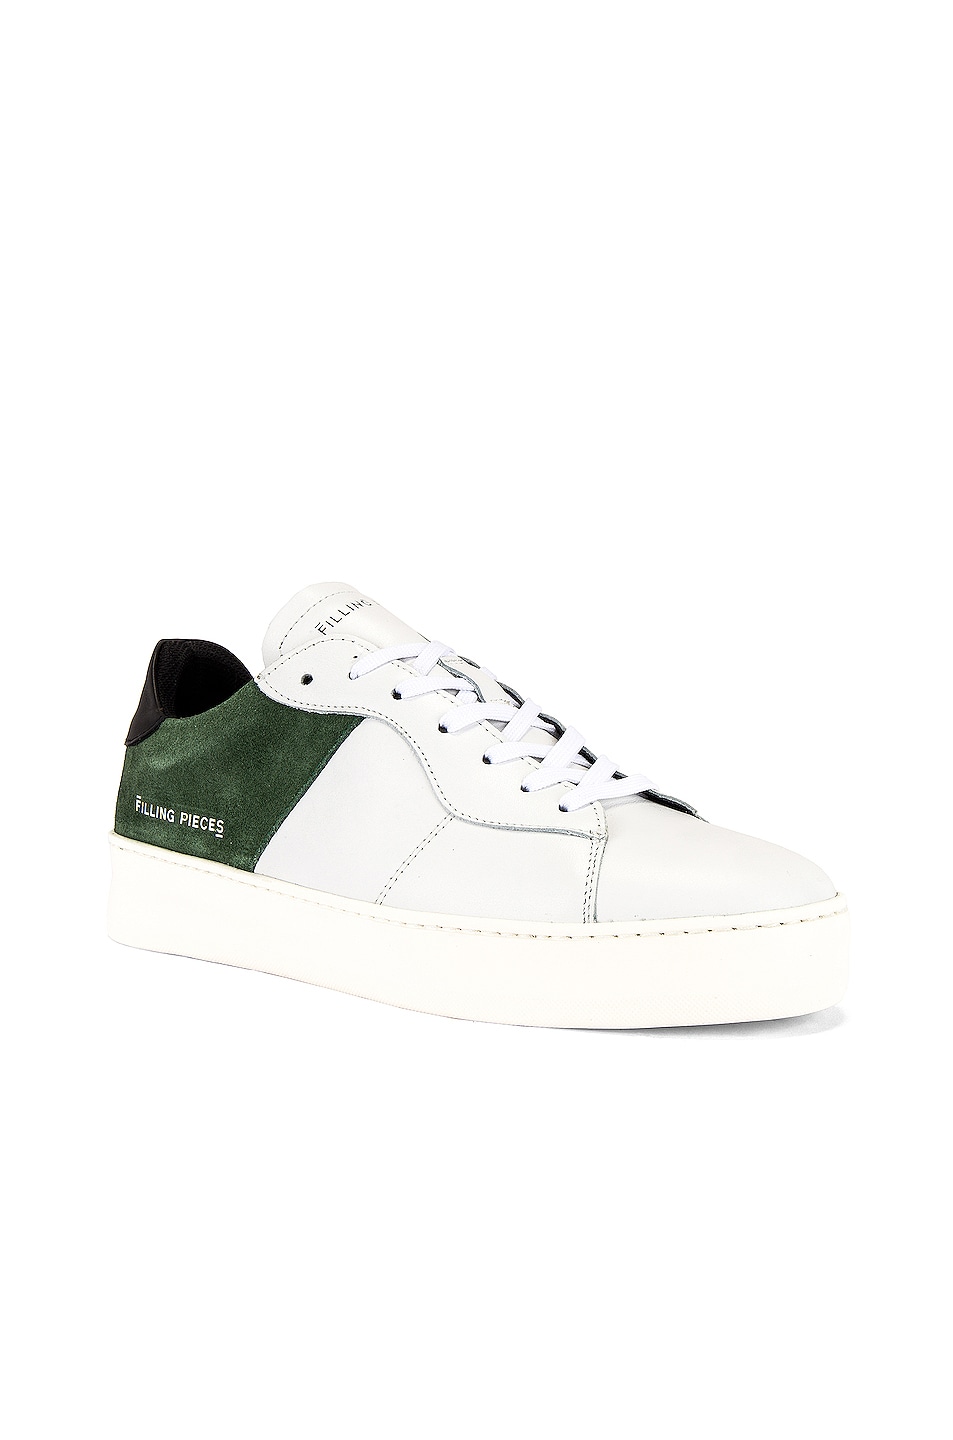 Image 1 of Filling Pieces Court Sneaker in Dark Green